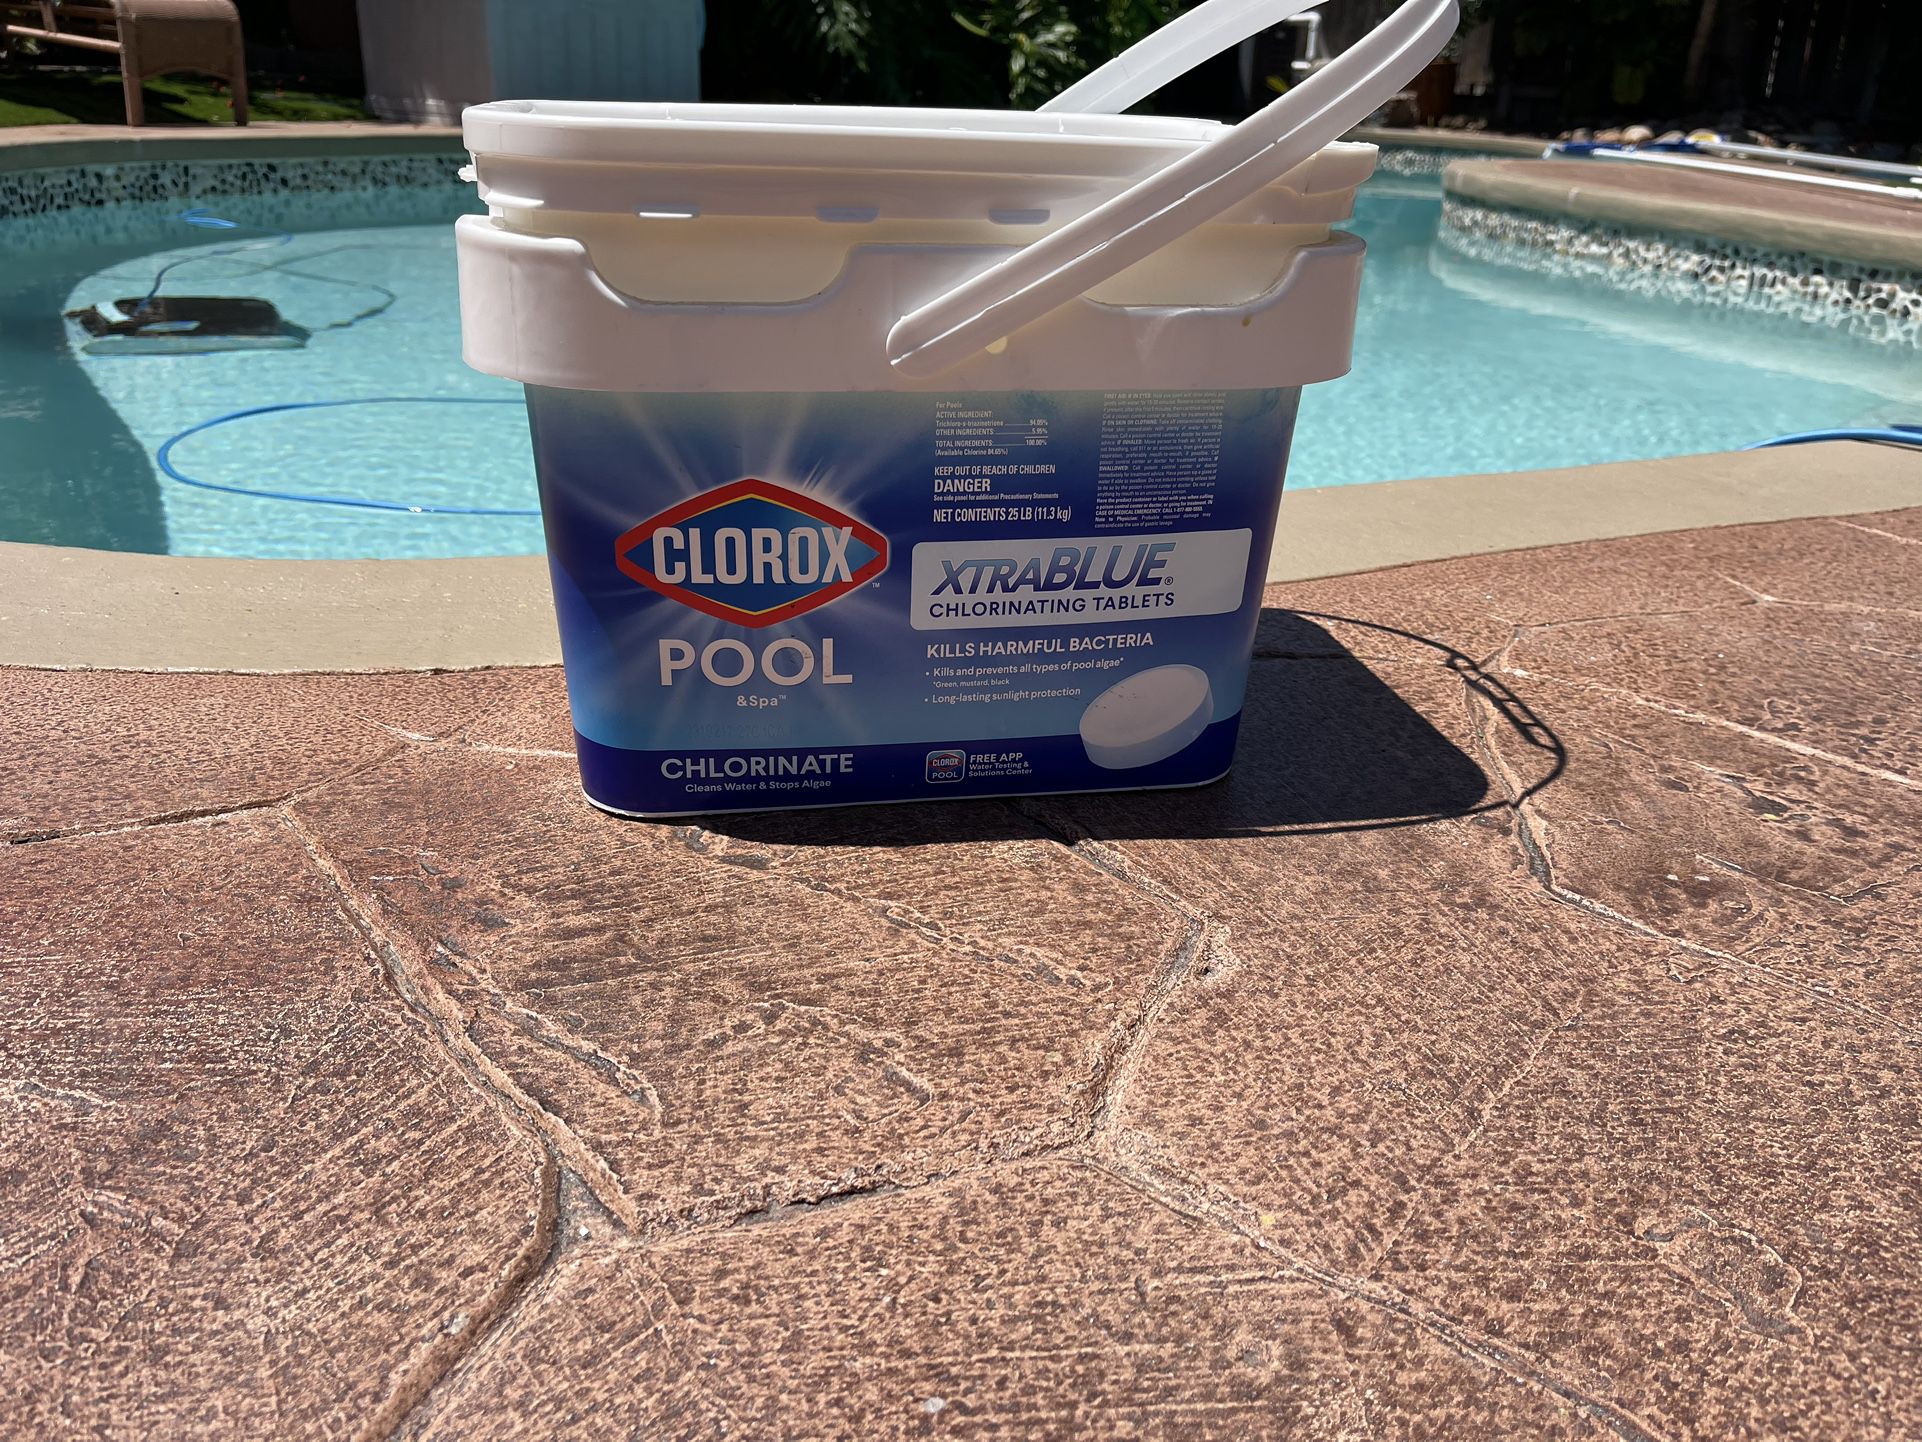 Clorox Pool&Spa XtraBlue pool cleaner. Brand new not opened. 25 lbs.